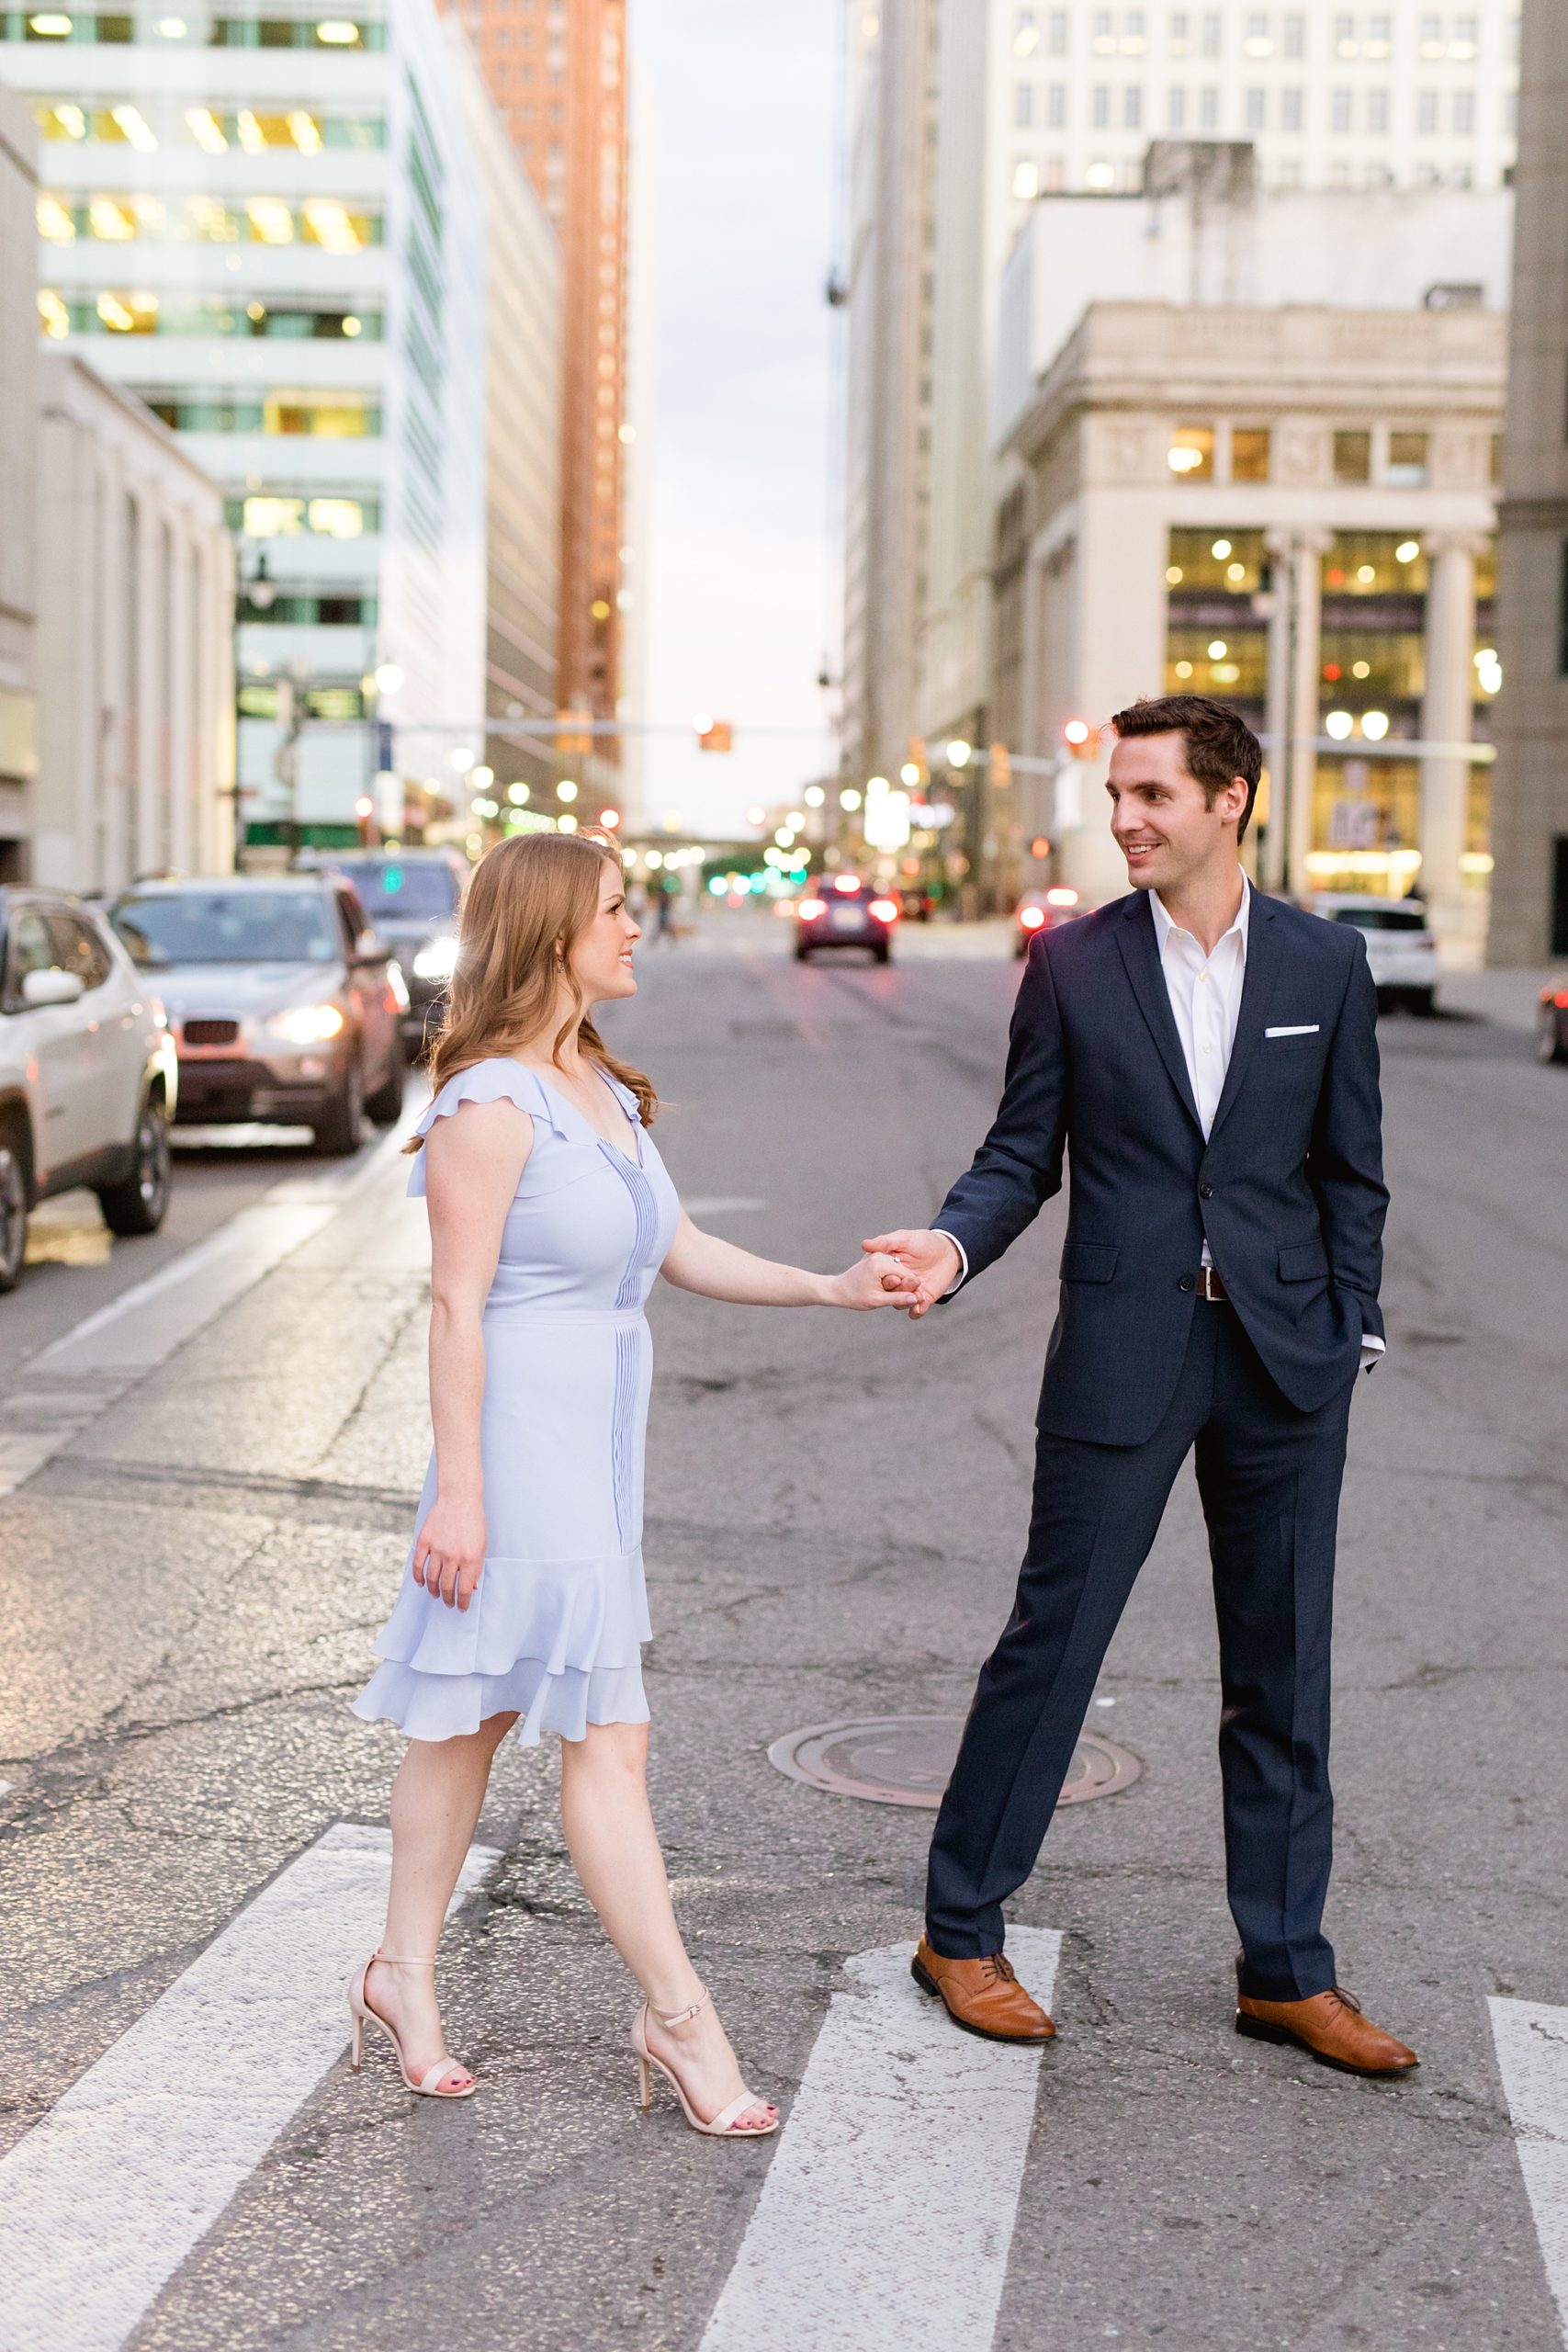 Engagement session in Downtown Detroit | Crossing the street | Breanne Rochelle Photography